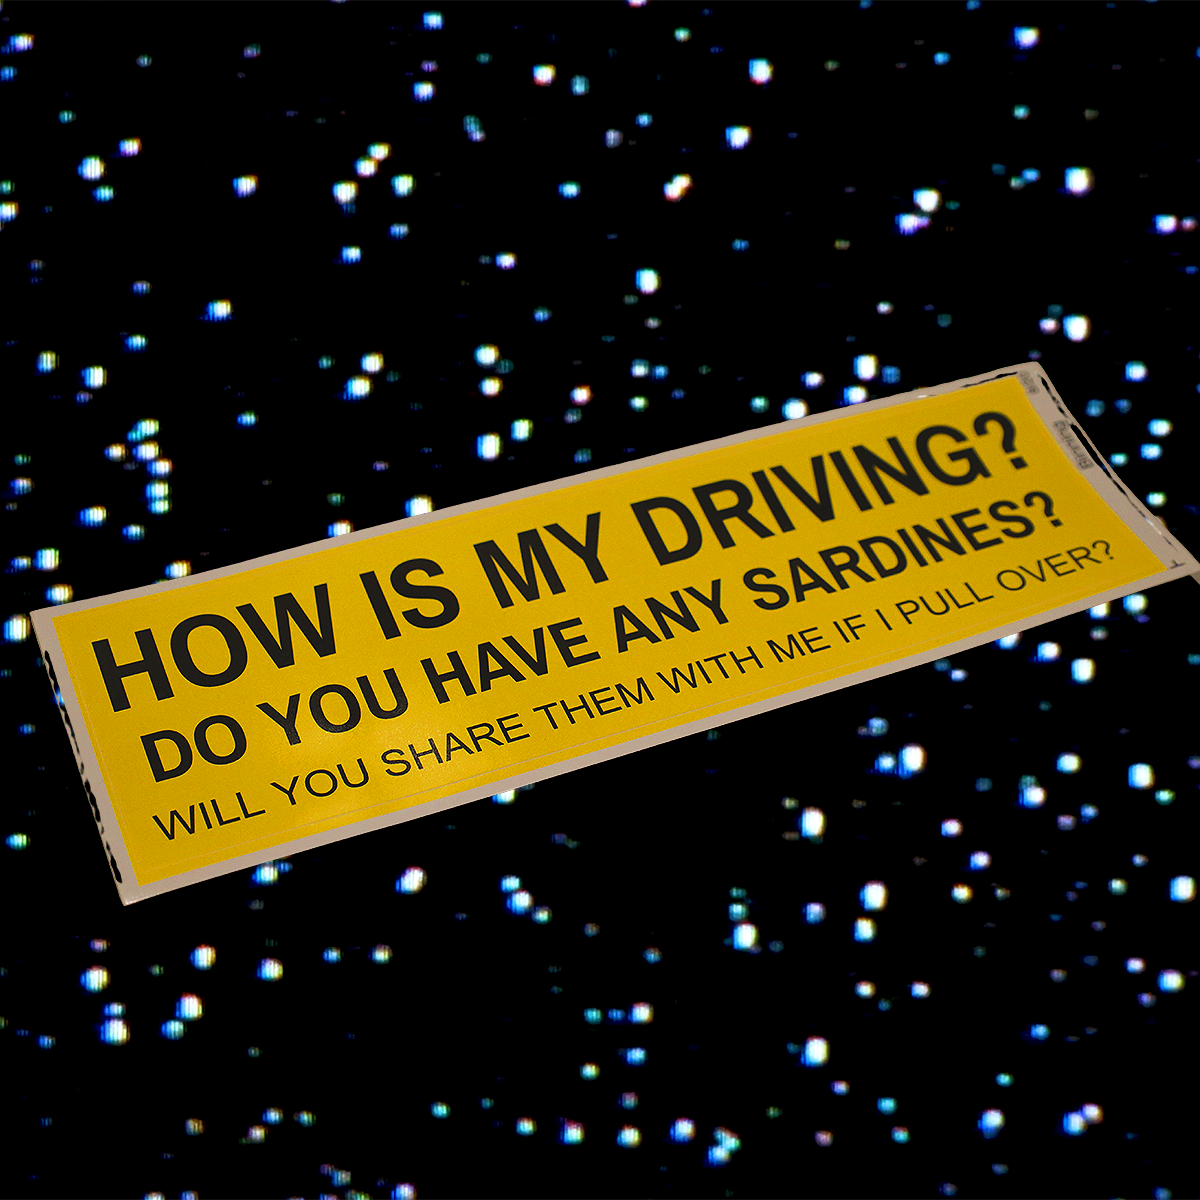 HOW IS MY DRIVING? DO YOU HAVE ANY SARDINES? BUMPER STICKER